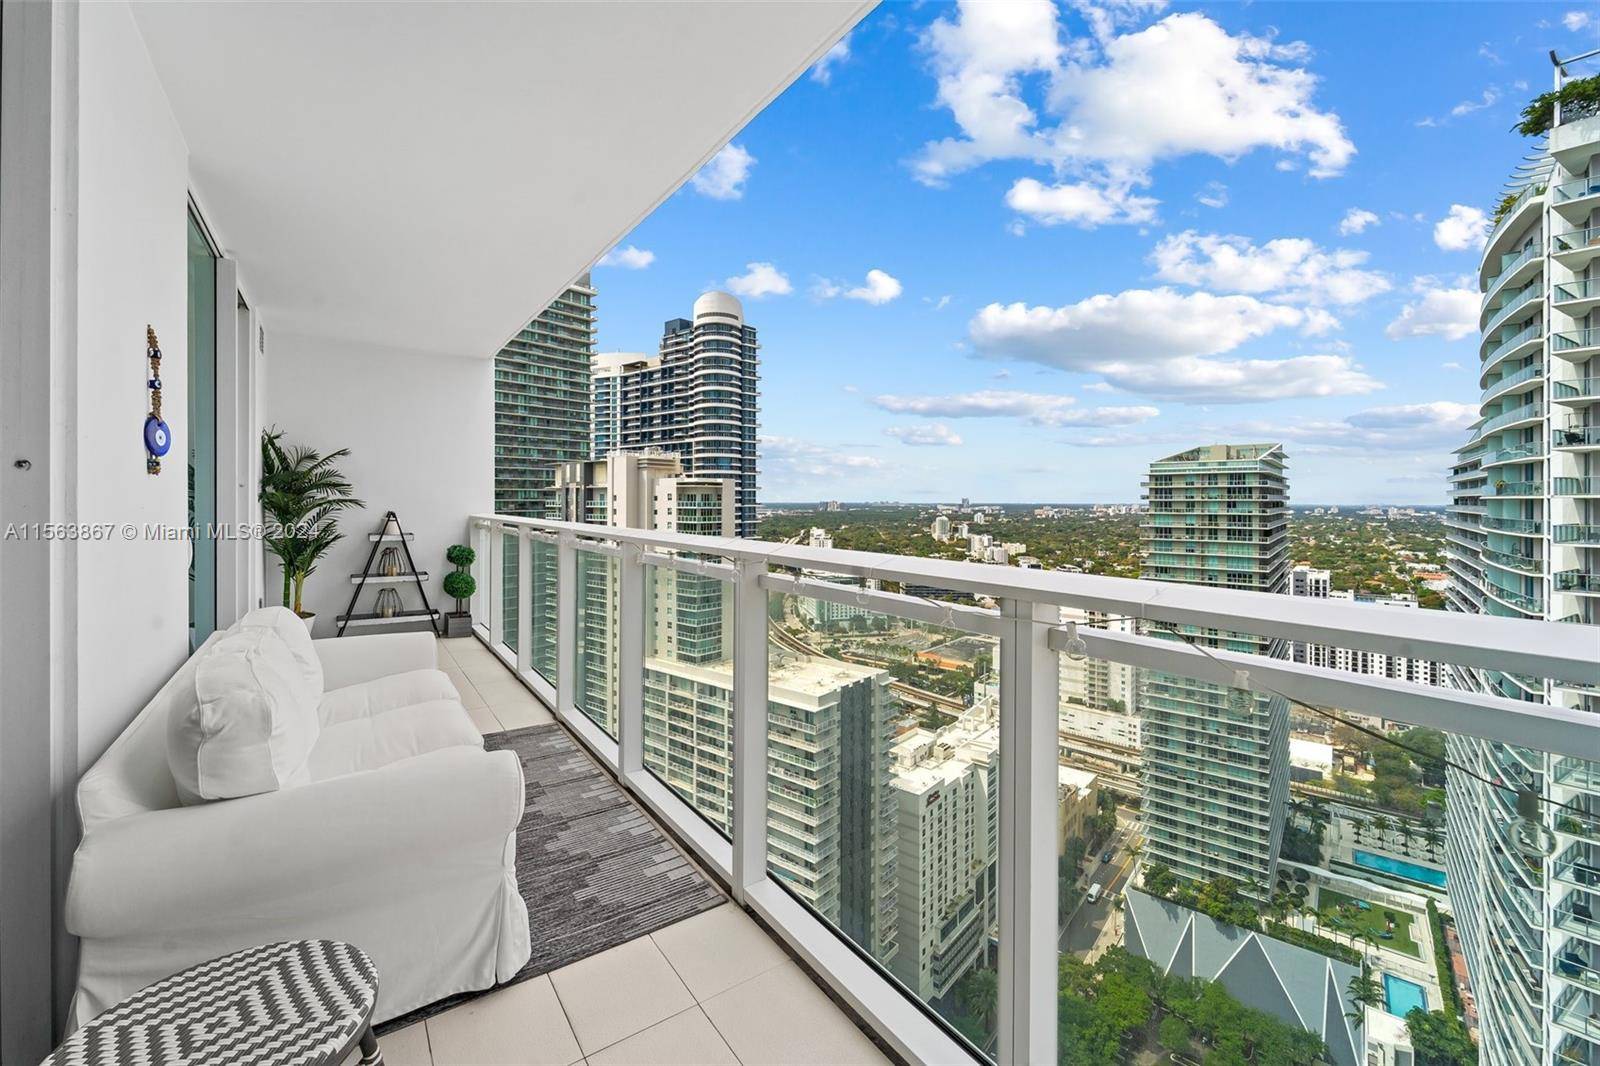 Experience the epitome of urban luxury living in this beautiful fully furnished, 2 Bedroom, 2 bathroom, plus Den corner unit at The Bond Brickell.